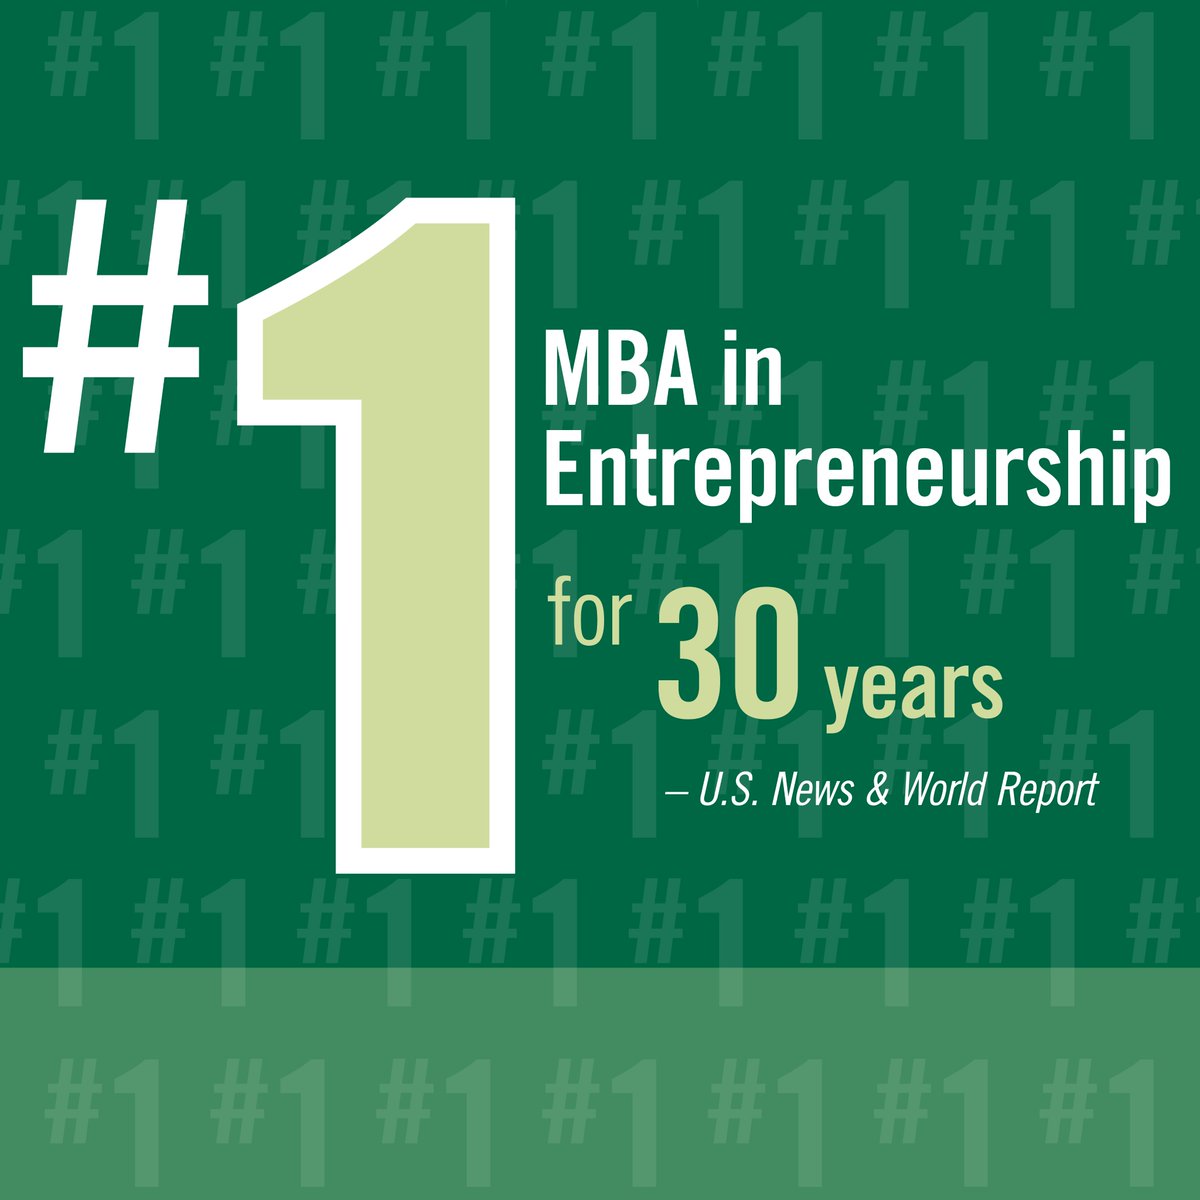 Babson has been named the No. 1 MBA for entrepreneurship by @USNews for the 30th consecutive year. This prestigious recognition honors our successes and underscores our collective commitment to leadership and innovation in entrepreneurship education. bab.sn/kzsn28